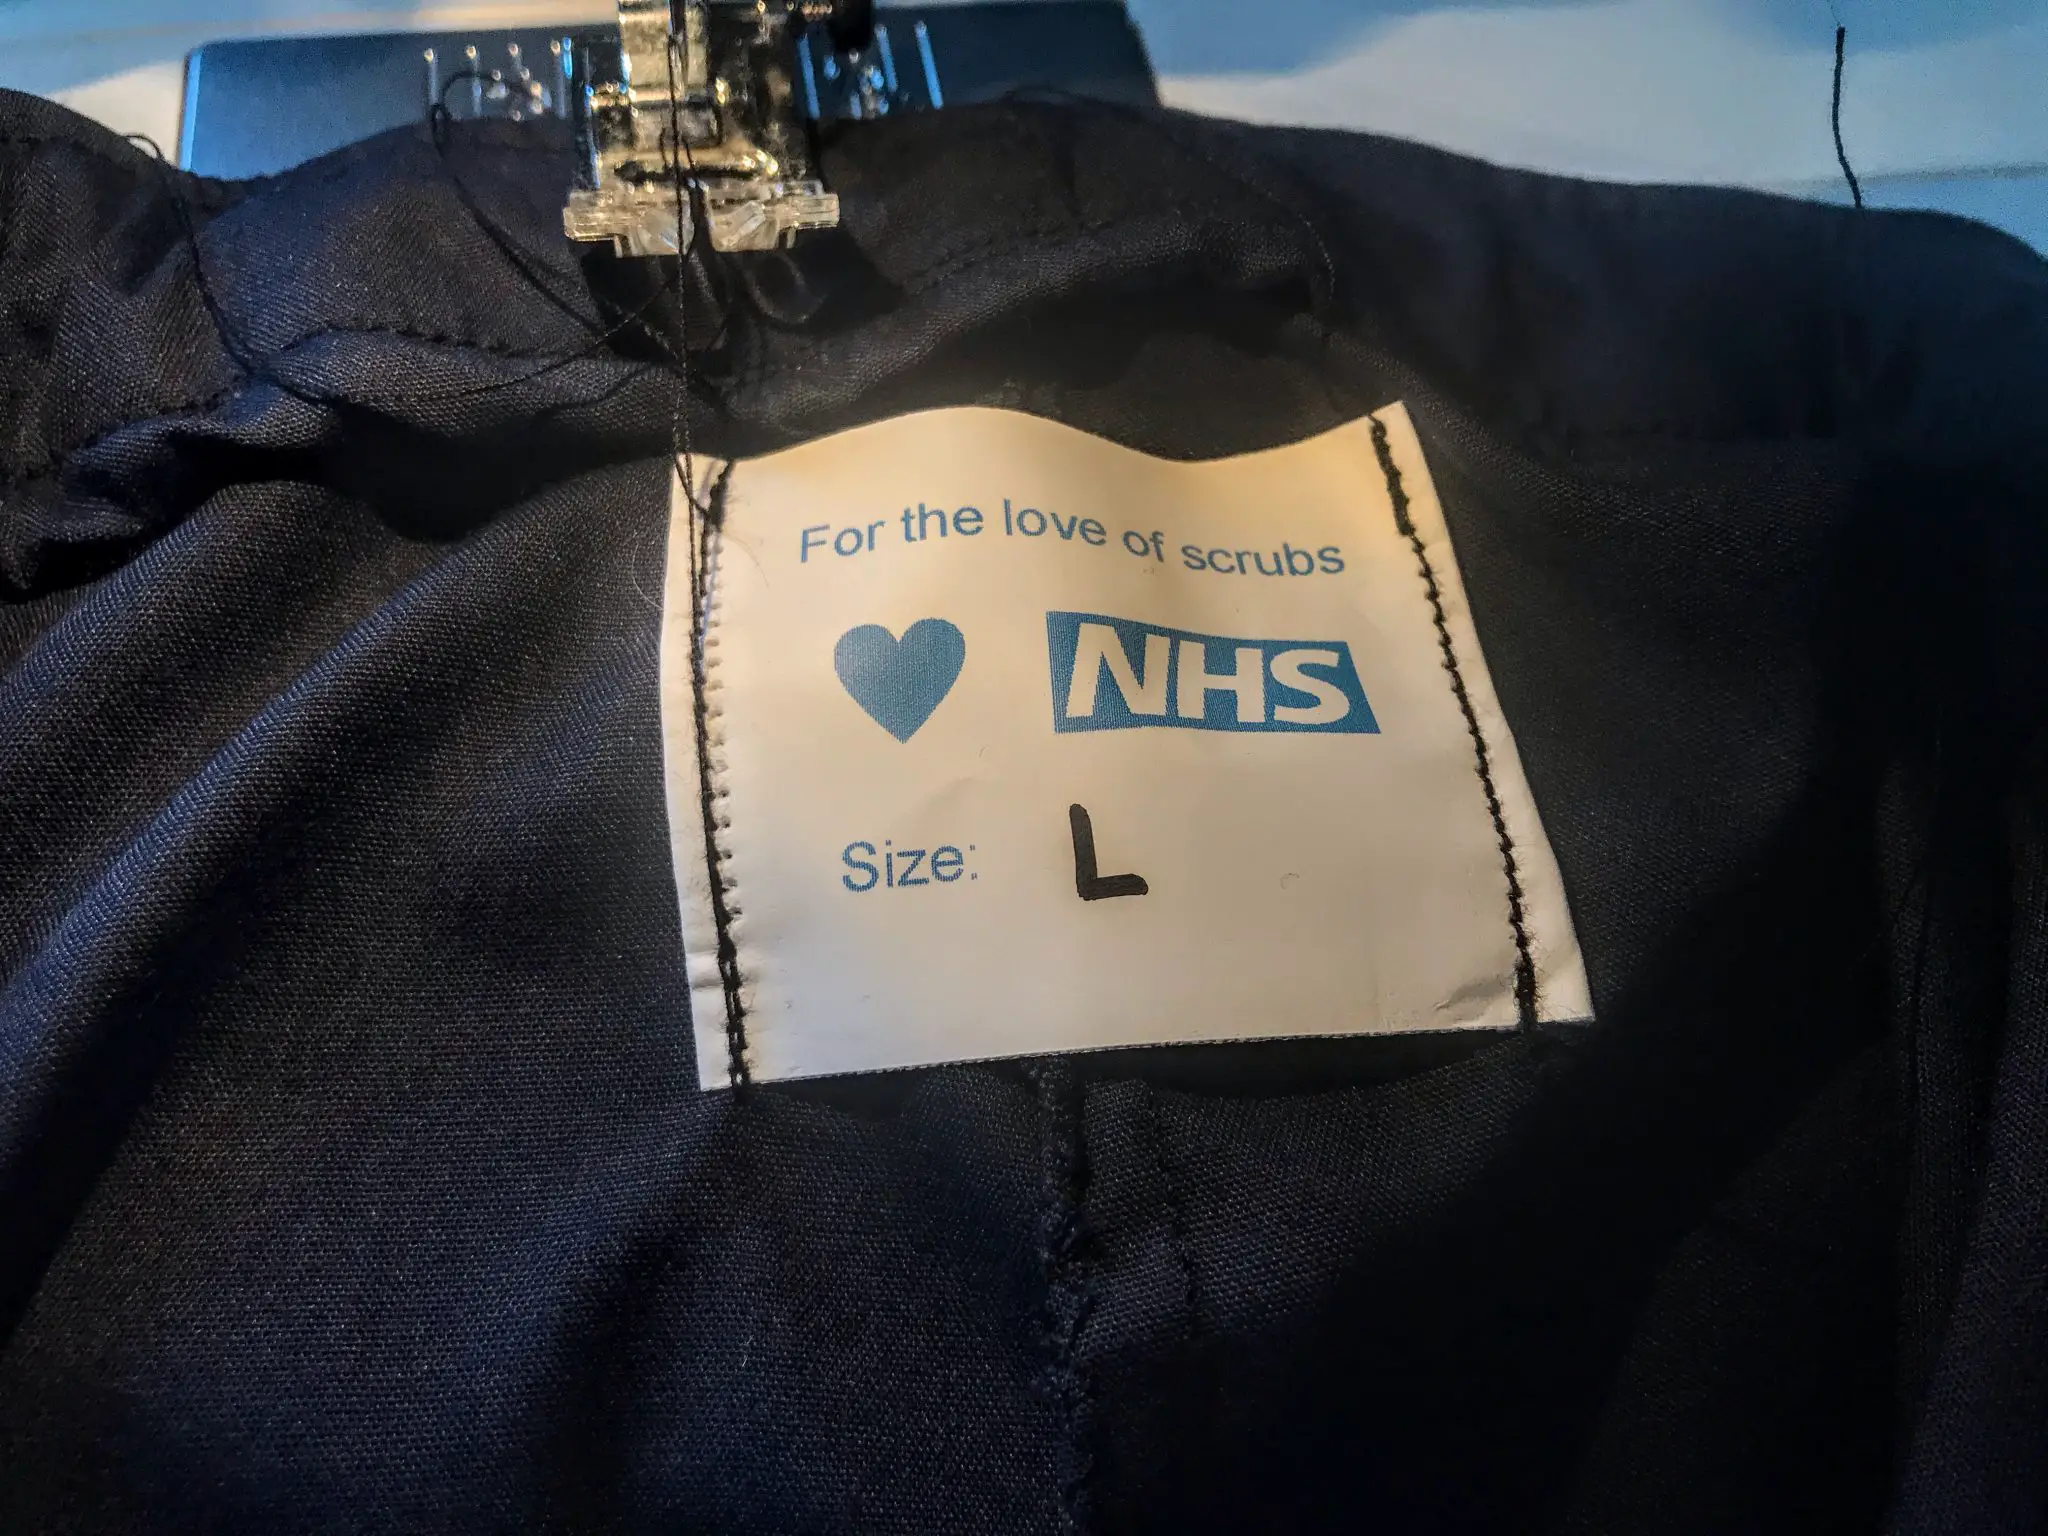 Putting in an NHS label